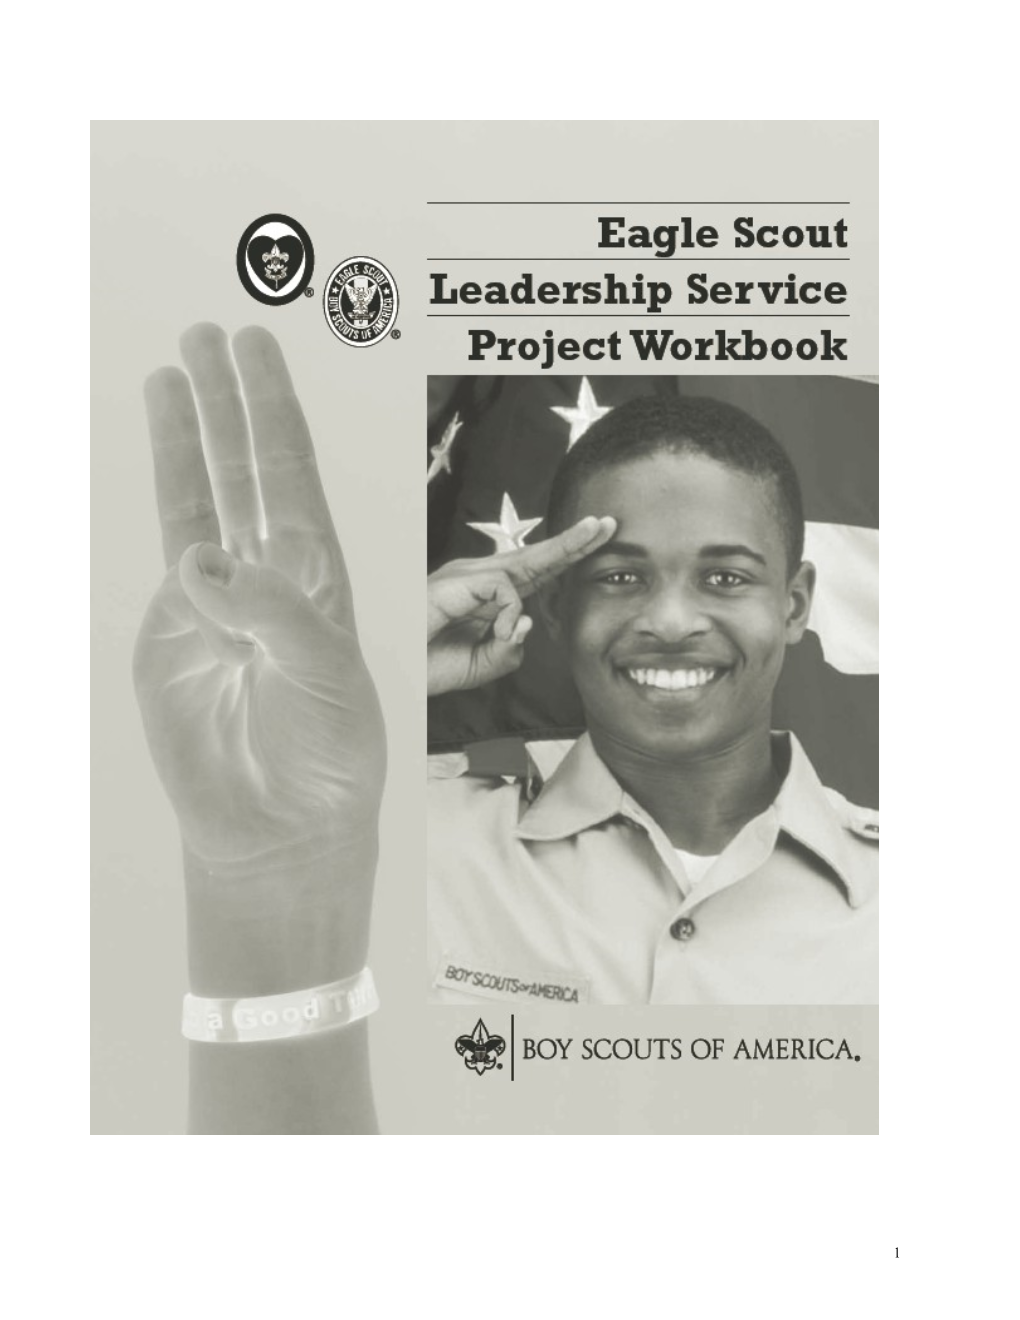 Eagle Scout Leadership Service Project Workbook